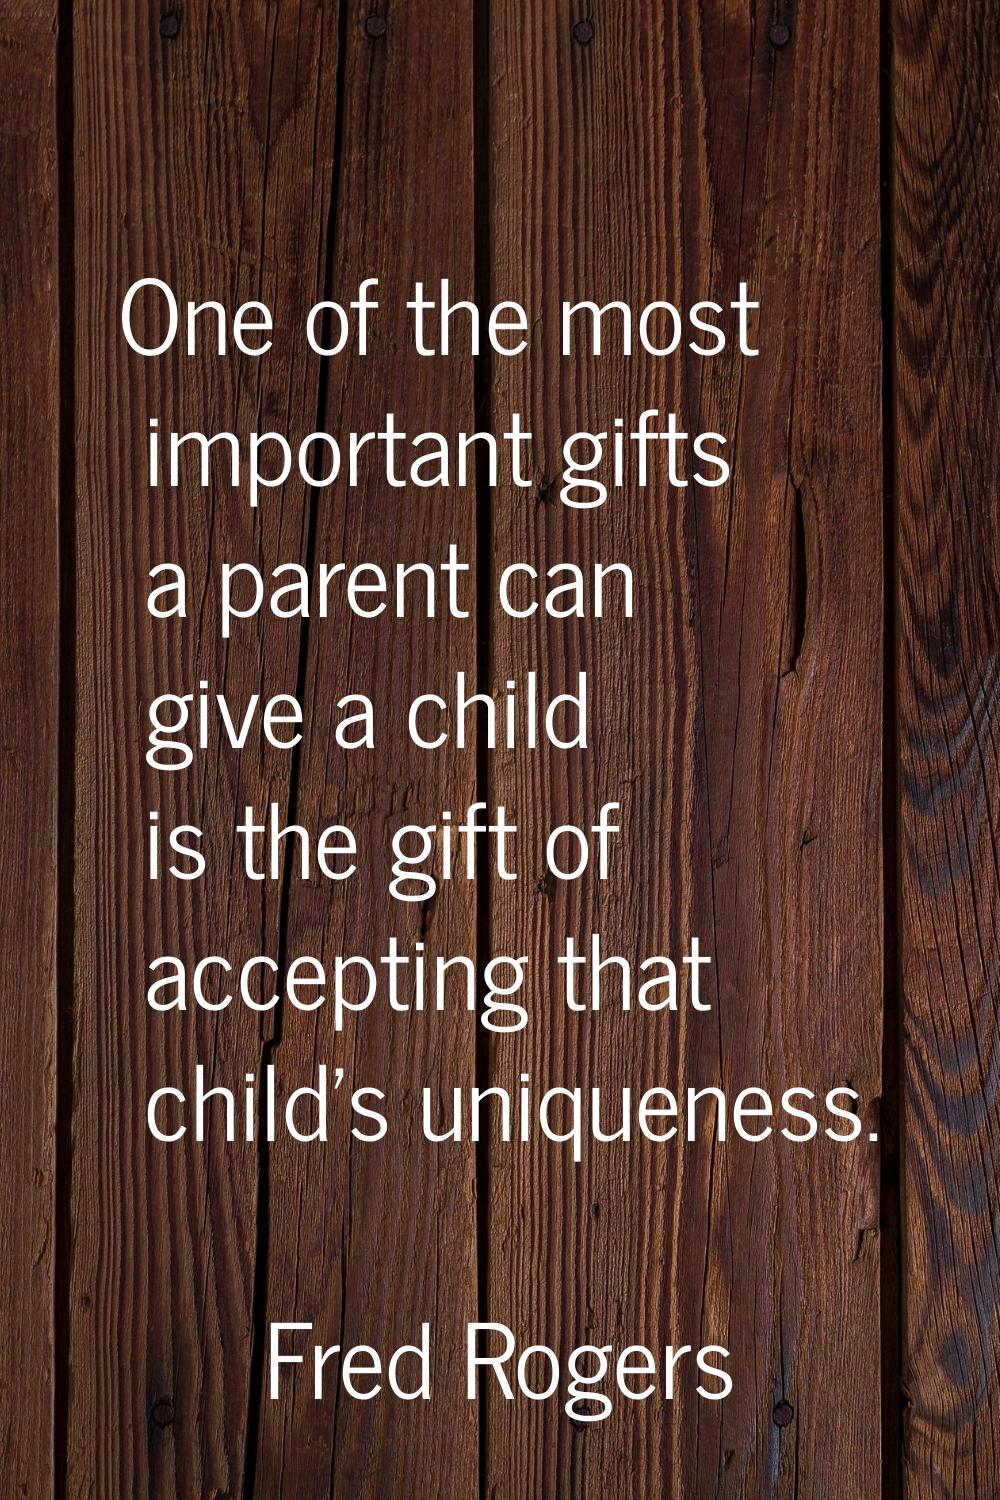 One of the most important gifts a parent can give a child is the gift of accepting that child's uni